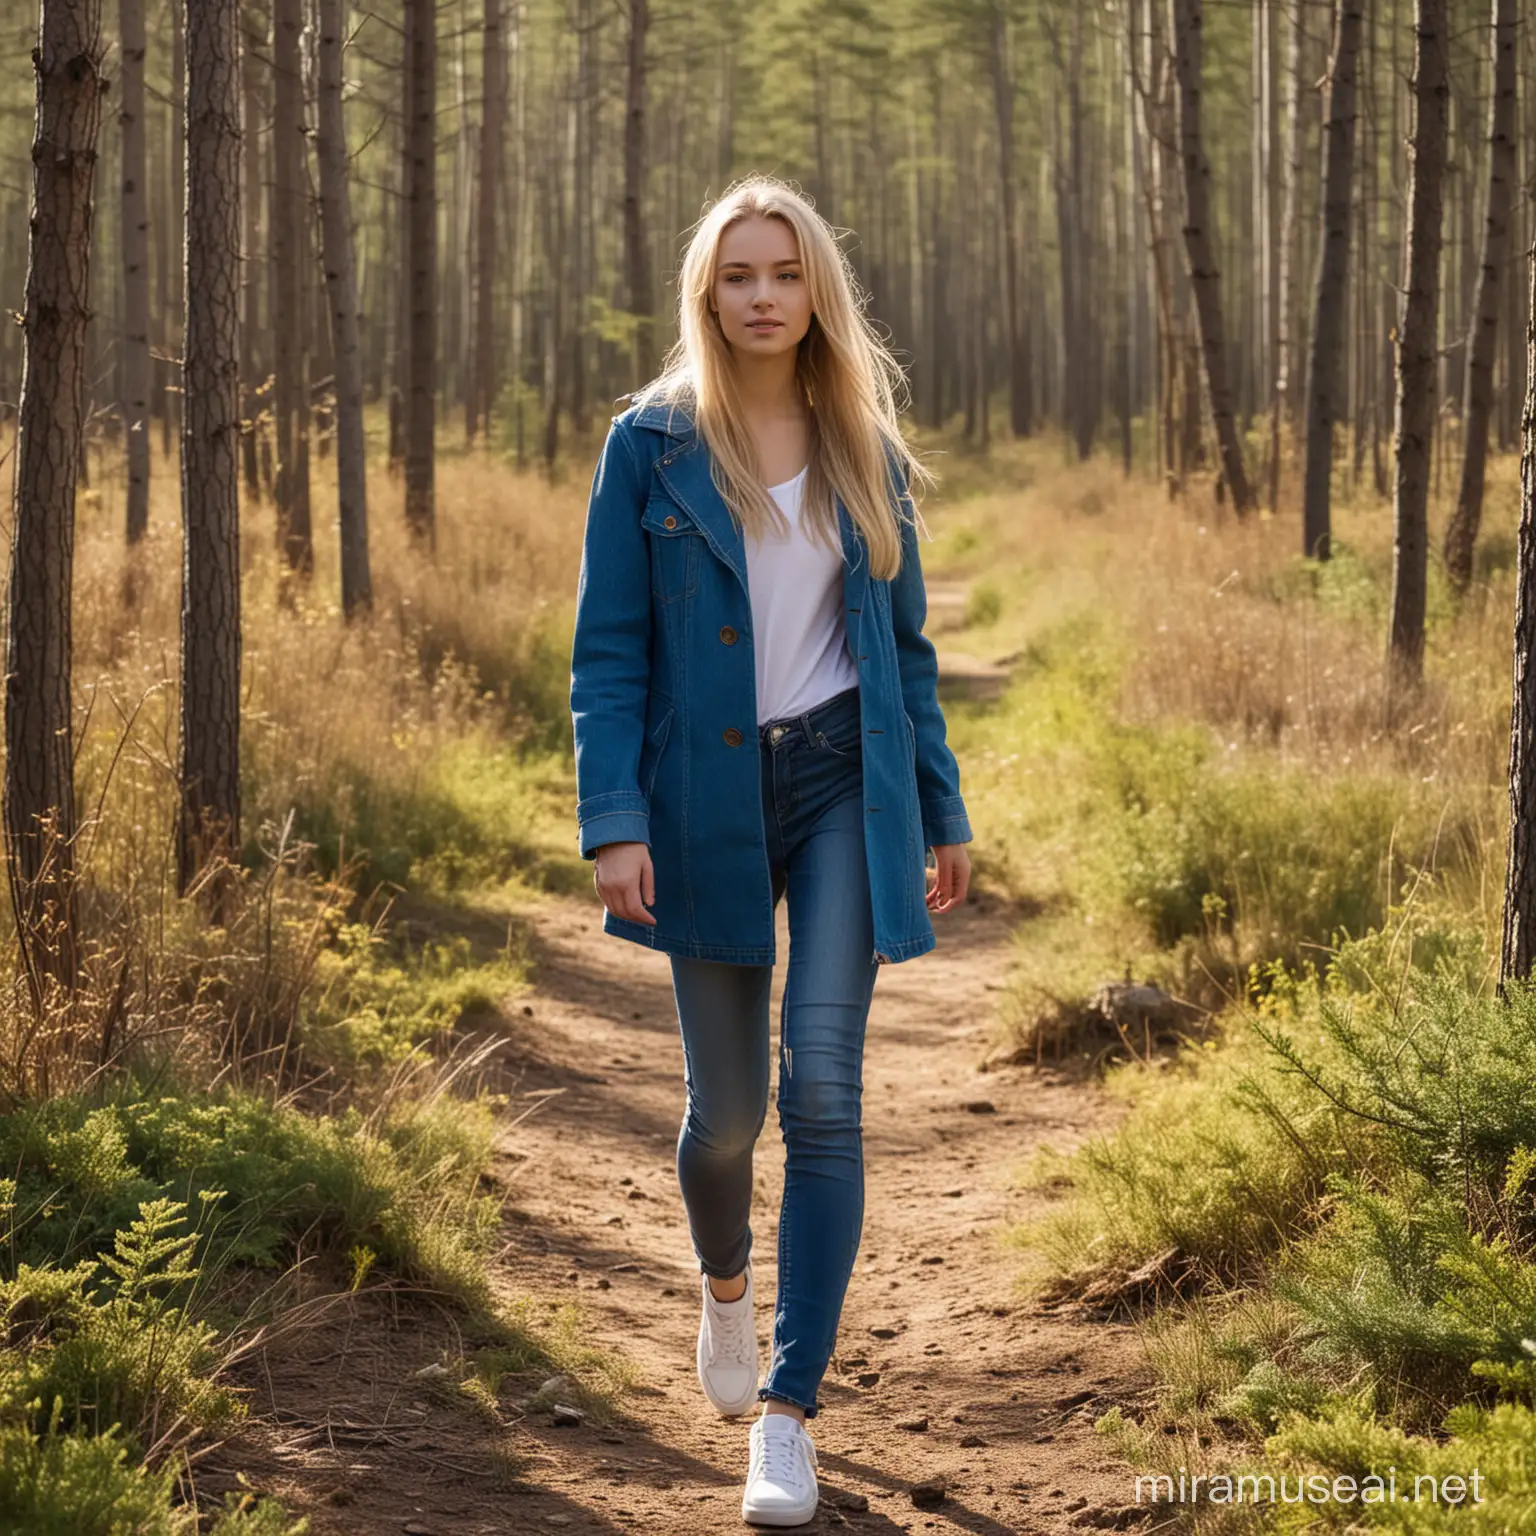 Beautiful Blonde Girl in Boreal Forest Tranquil Stroll in Sunlit Woodlands